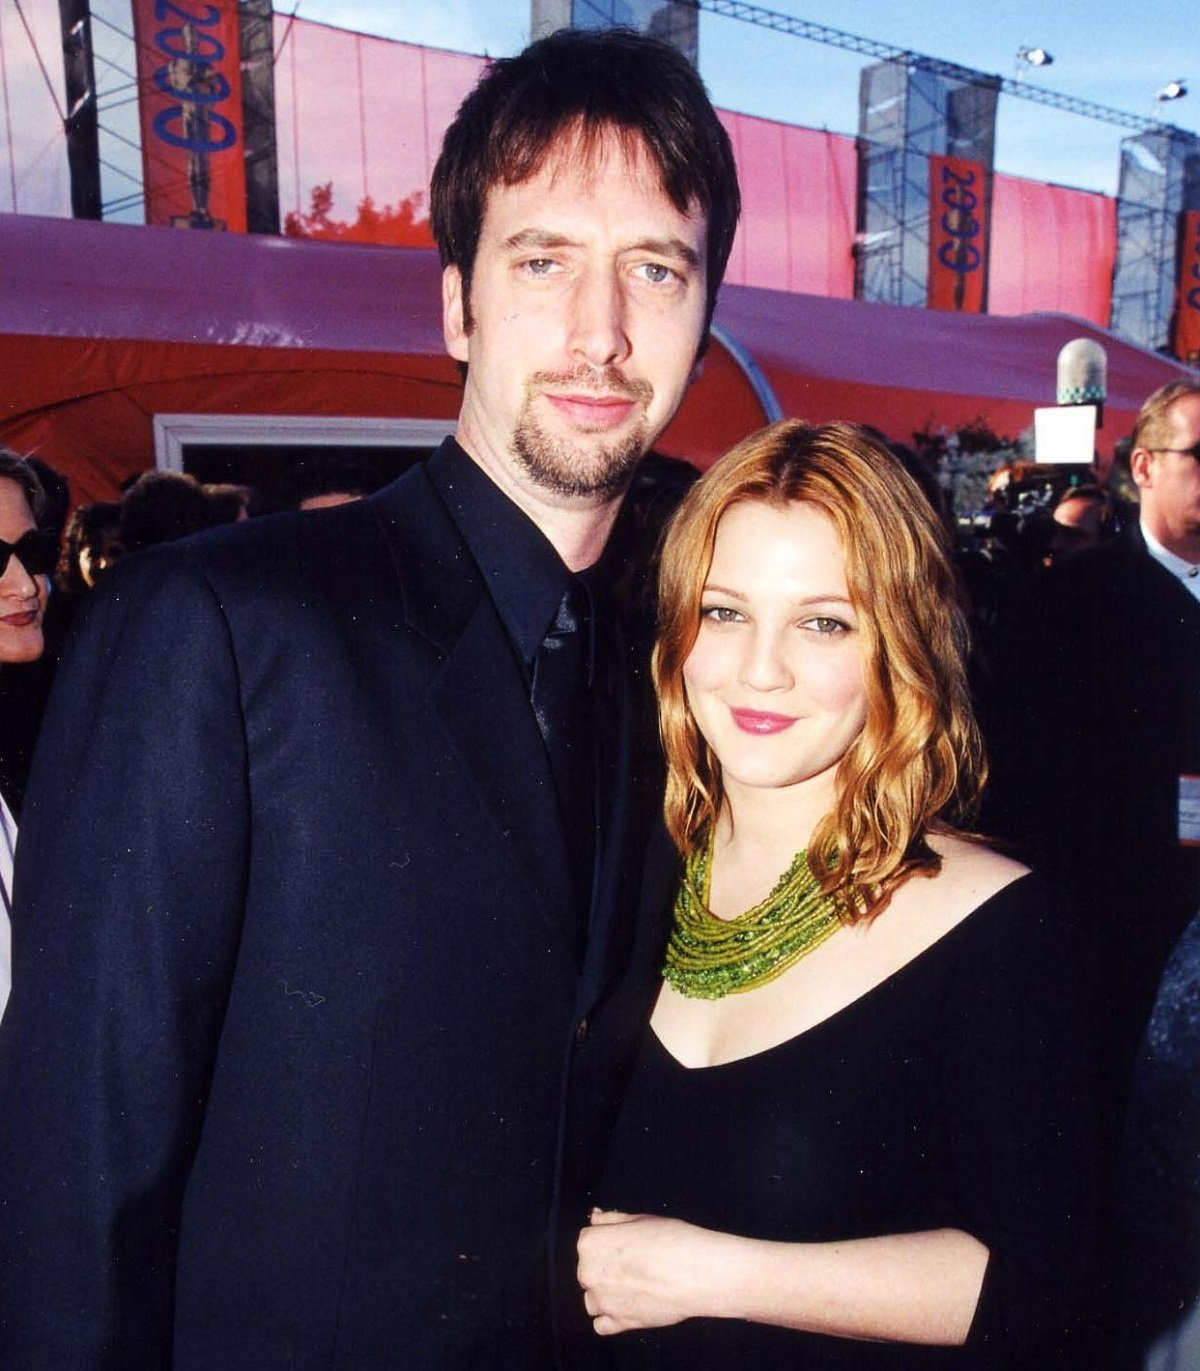 Tom Green and Drew Barrymore on the red carpet together at the 2000 Oscar Awards ceremony